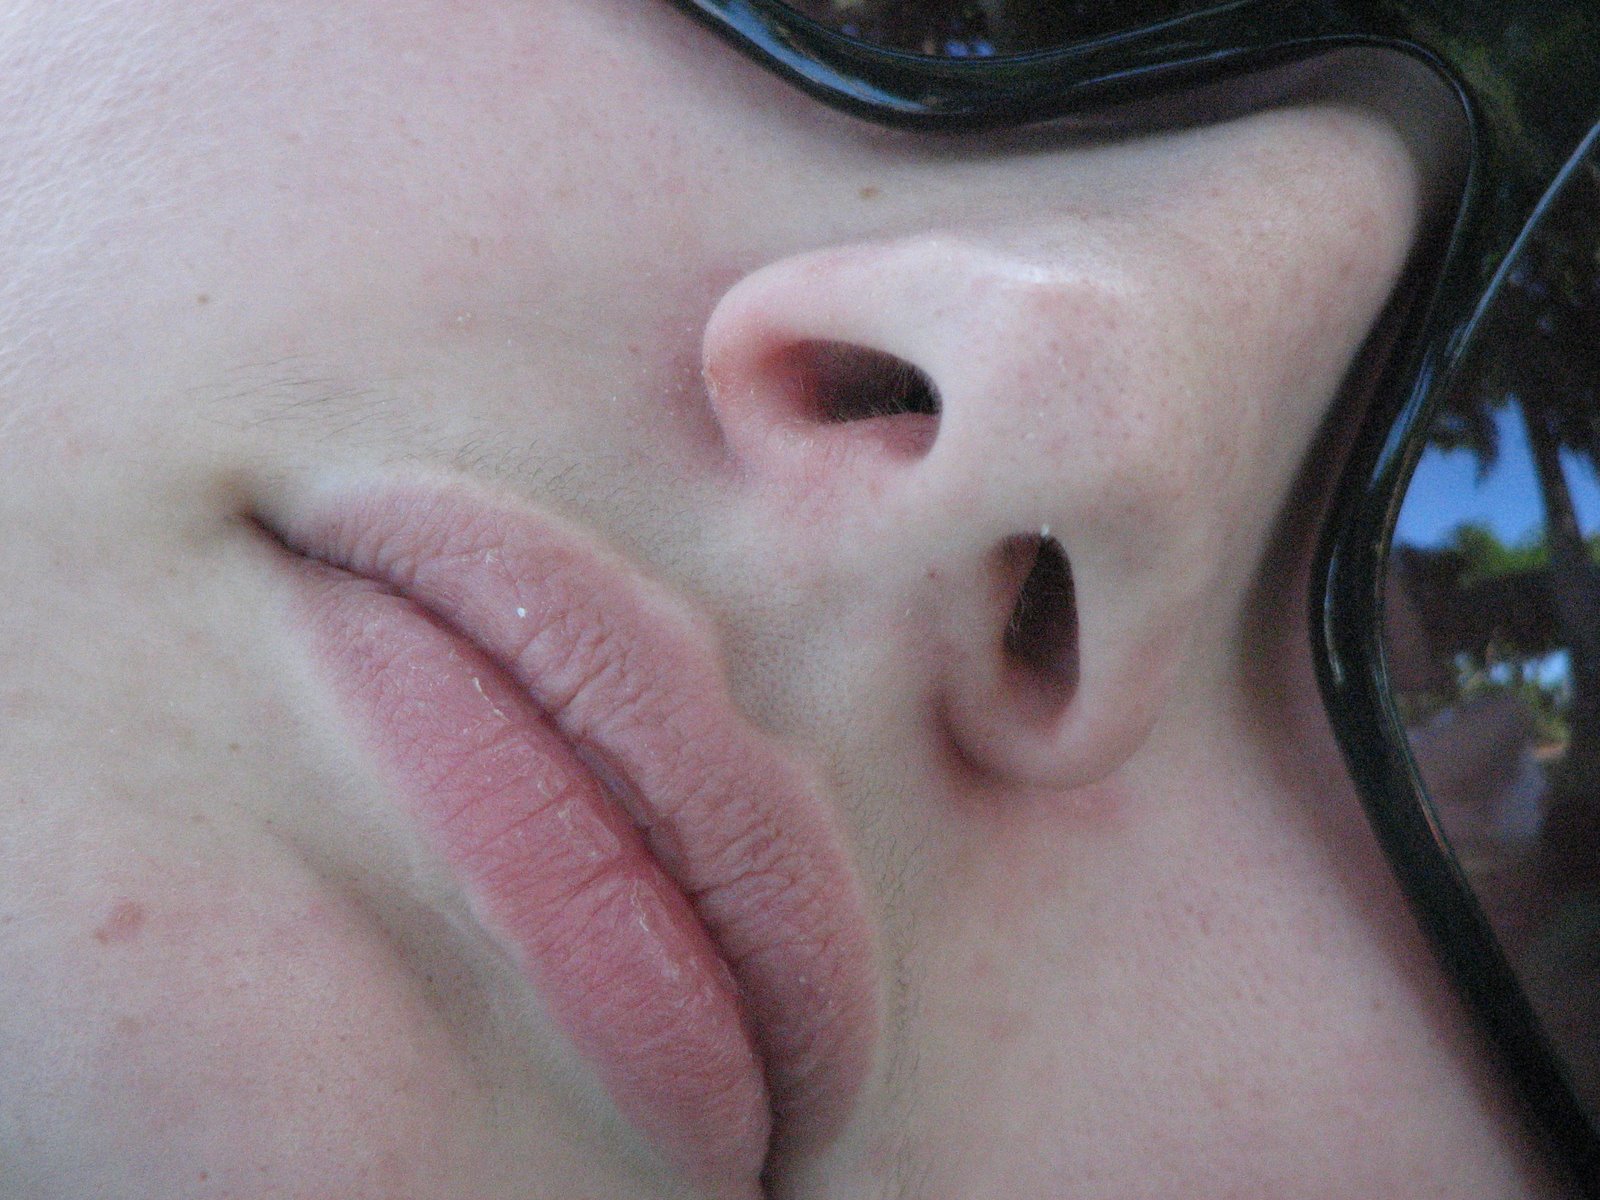 [Dayle+nose+she's+in++in+T'ville+Dec+06.JPG]